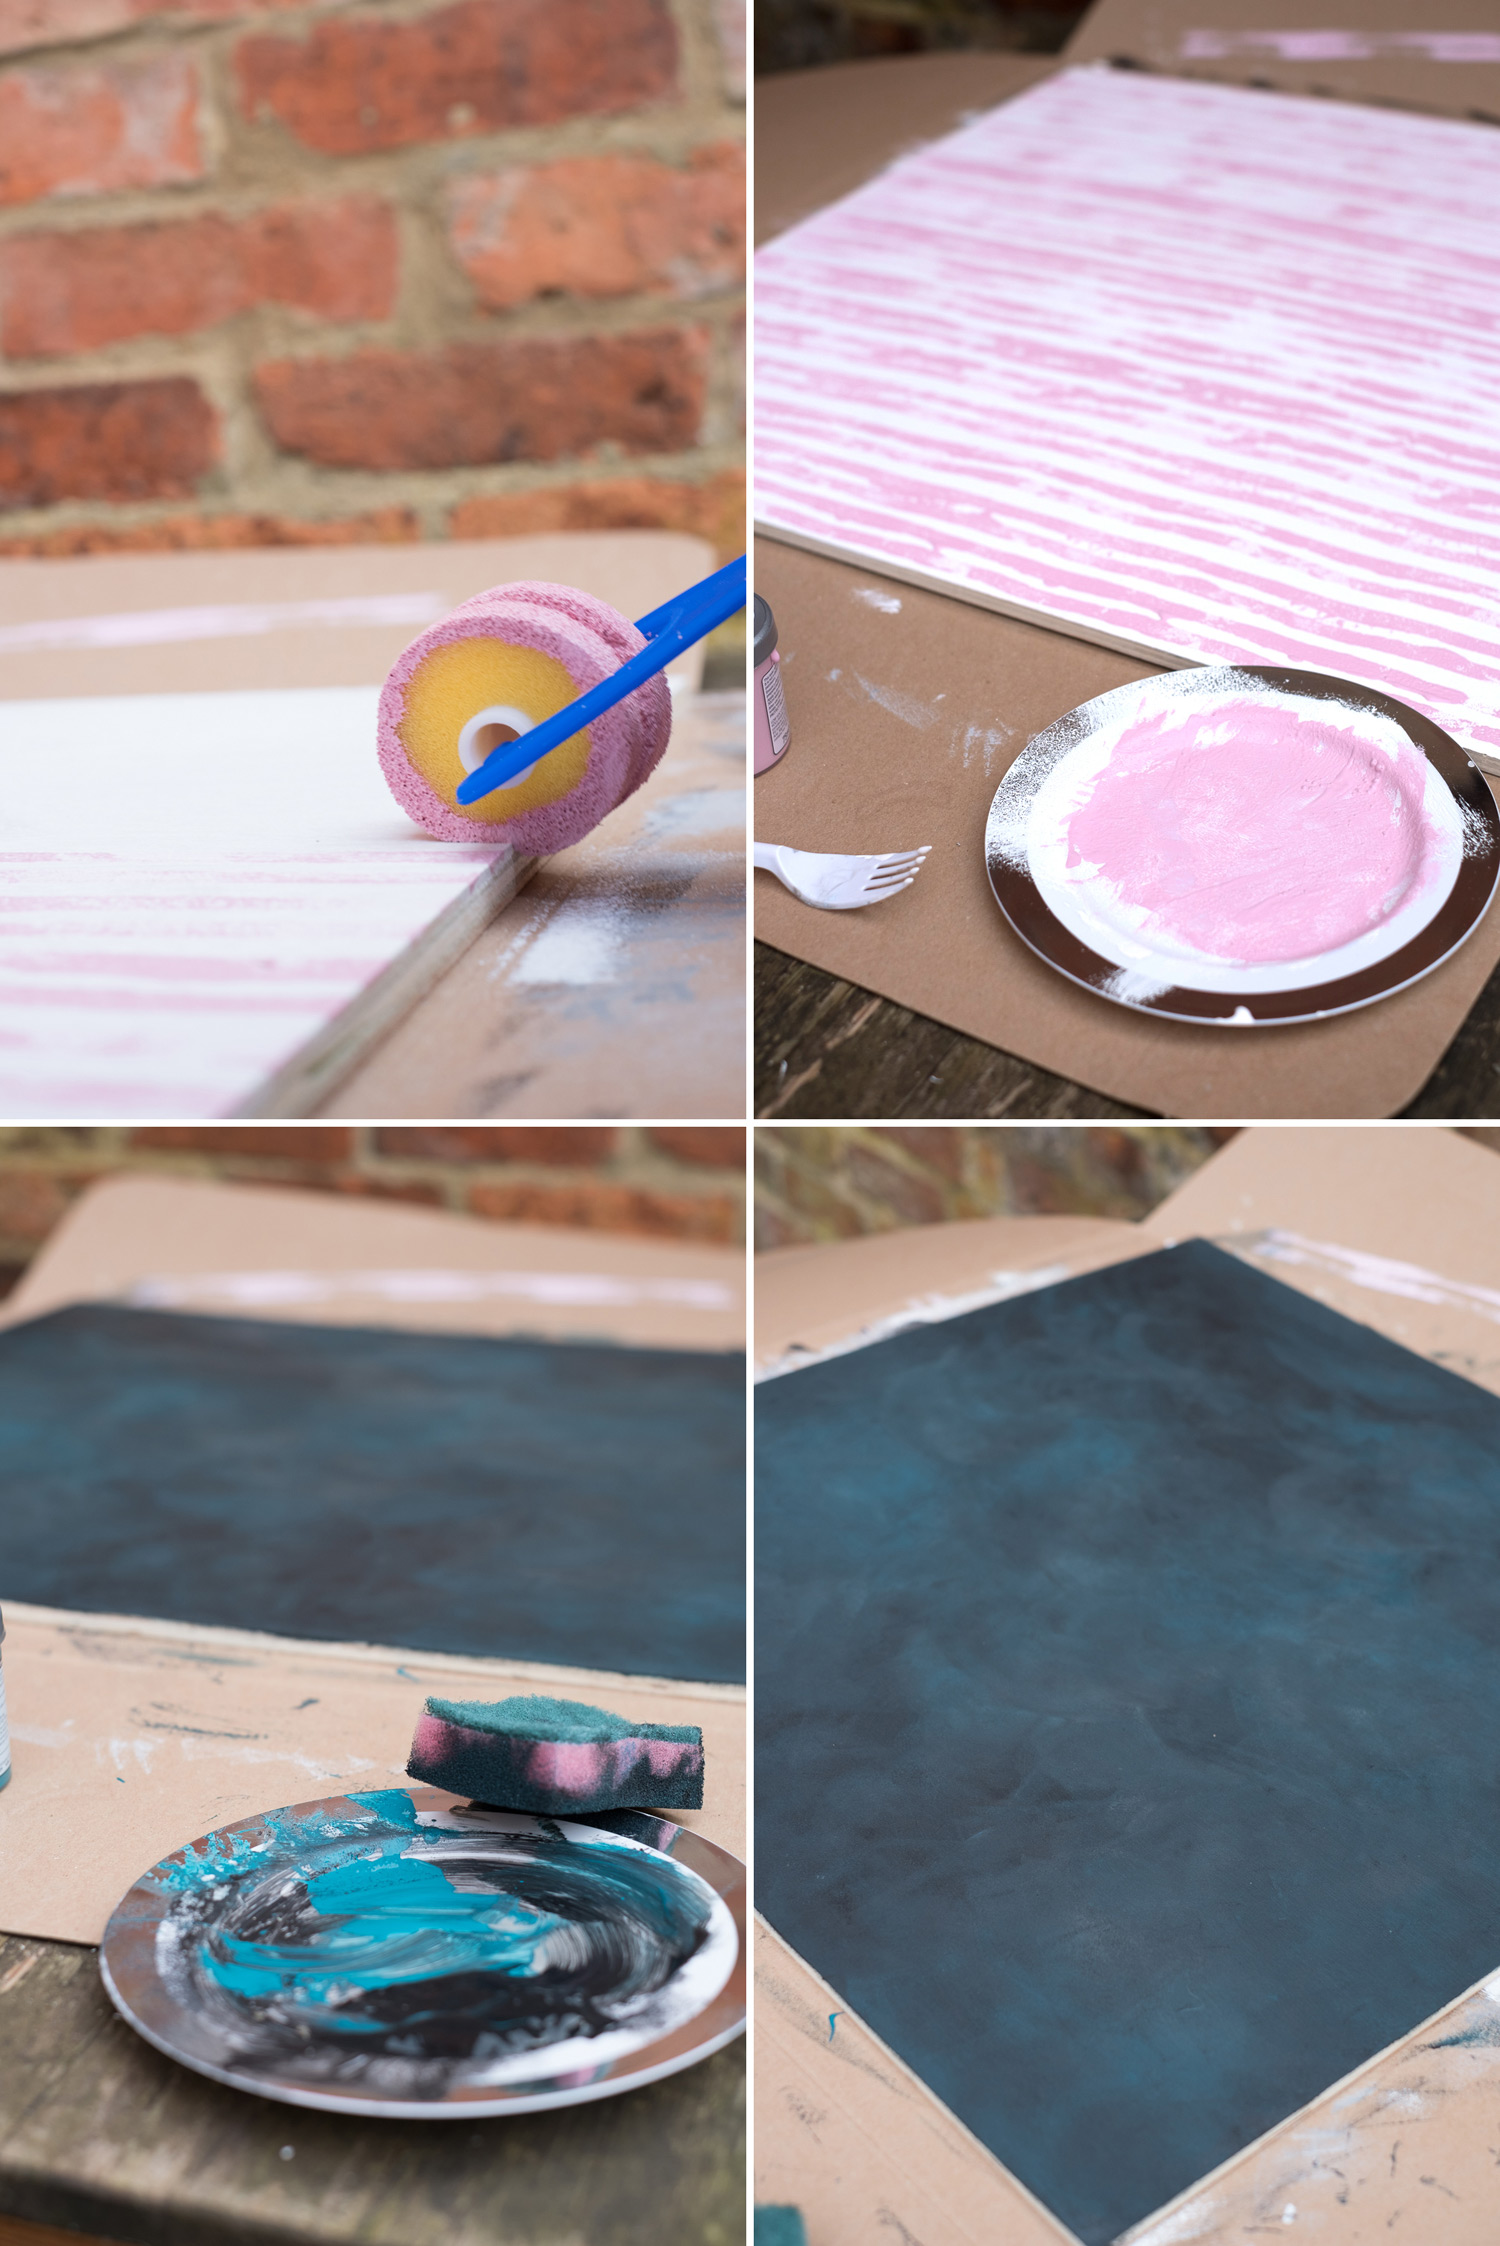 Image: Top: pink stripes created with a childâs foam painting roller. Bottom: blue, black, and grey...